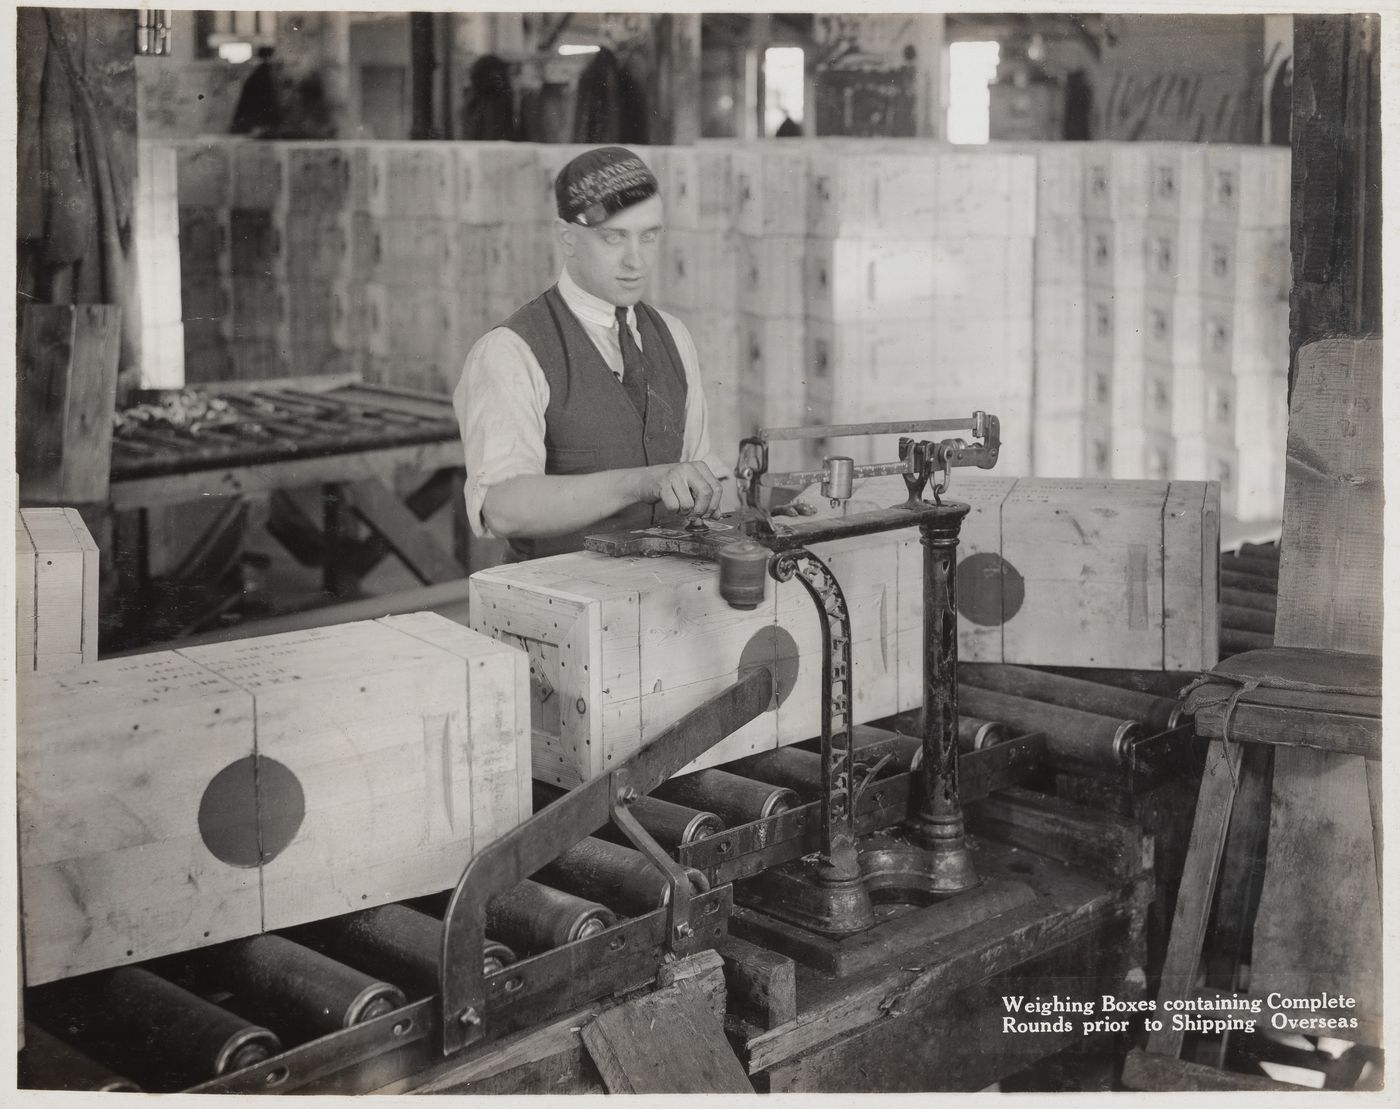 Interior view of workers weighing boxes containing complete rounds prior to shipping at the Energite Explosives Plant No. 3, the Shell Loading Plant, Renfrew, Ontario, Canada